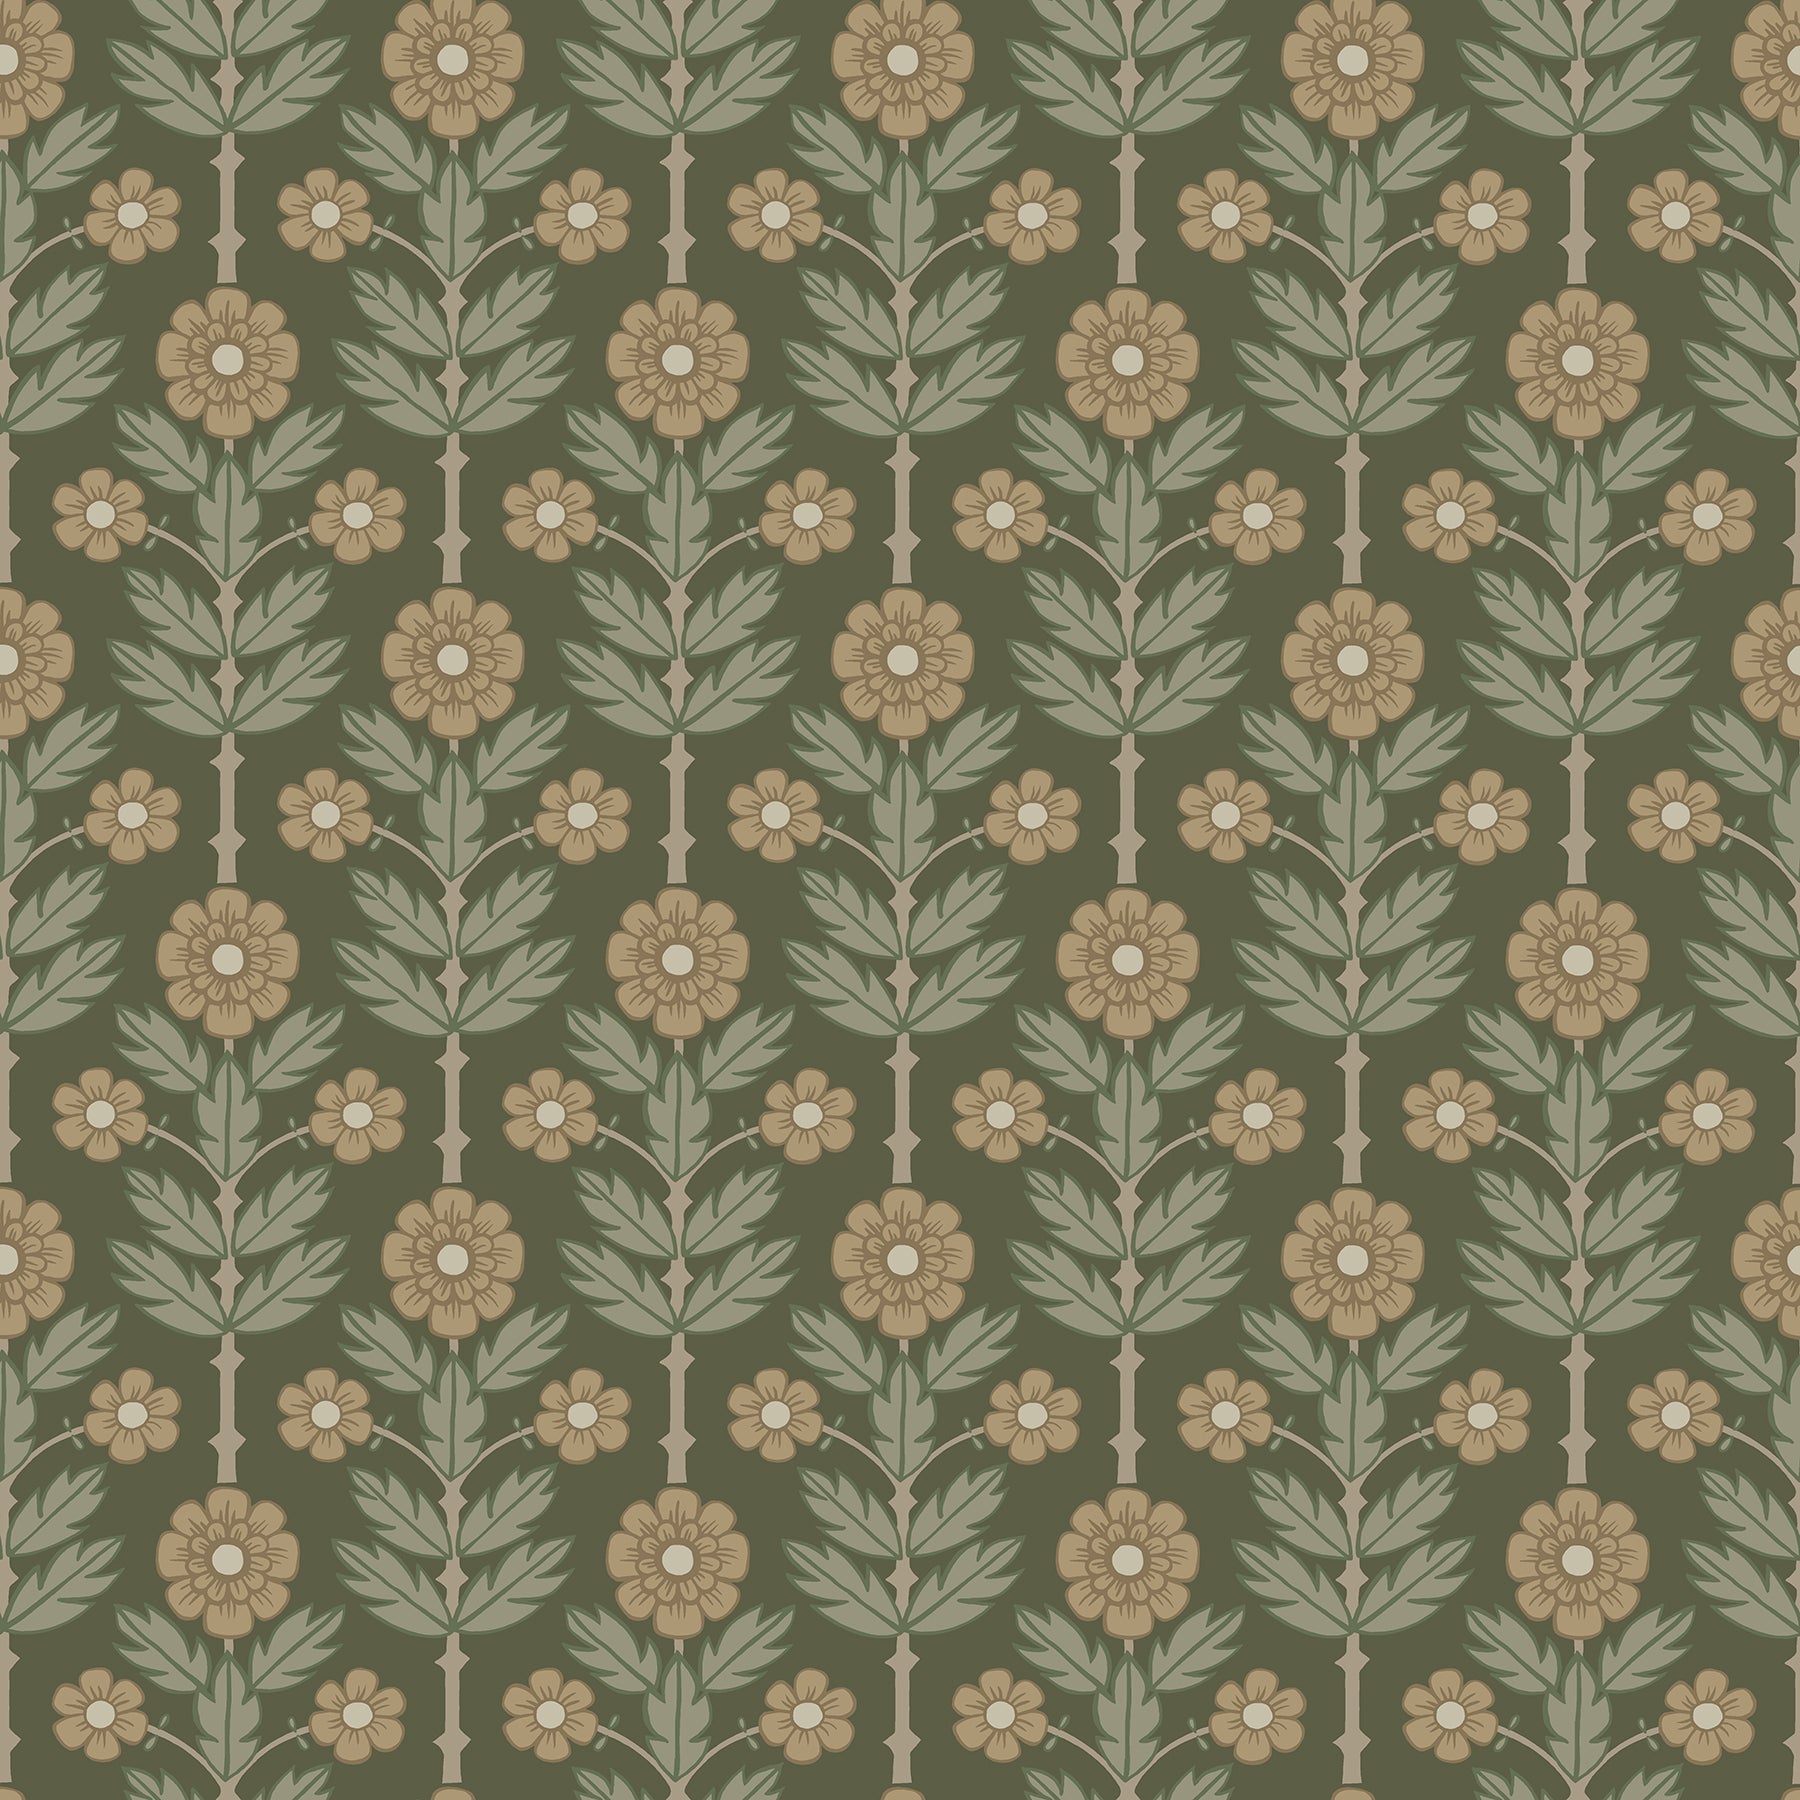 Looking for 2948-28009 Spring Aya Green Floral Green A-Street Prints Wallpaper